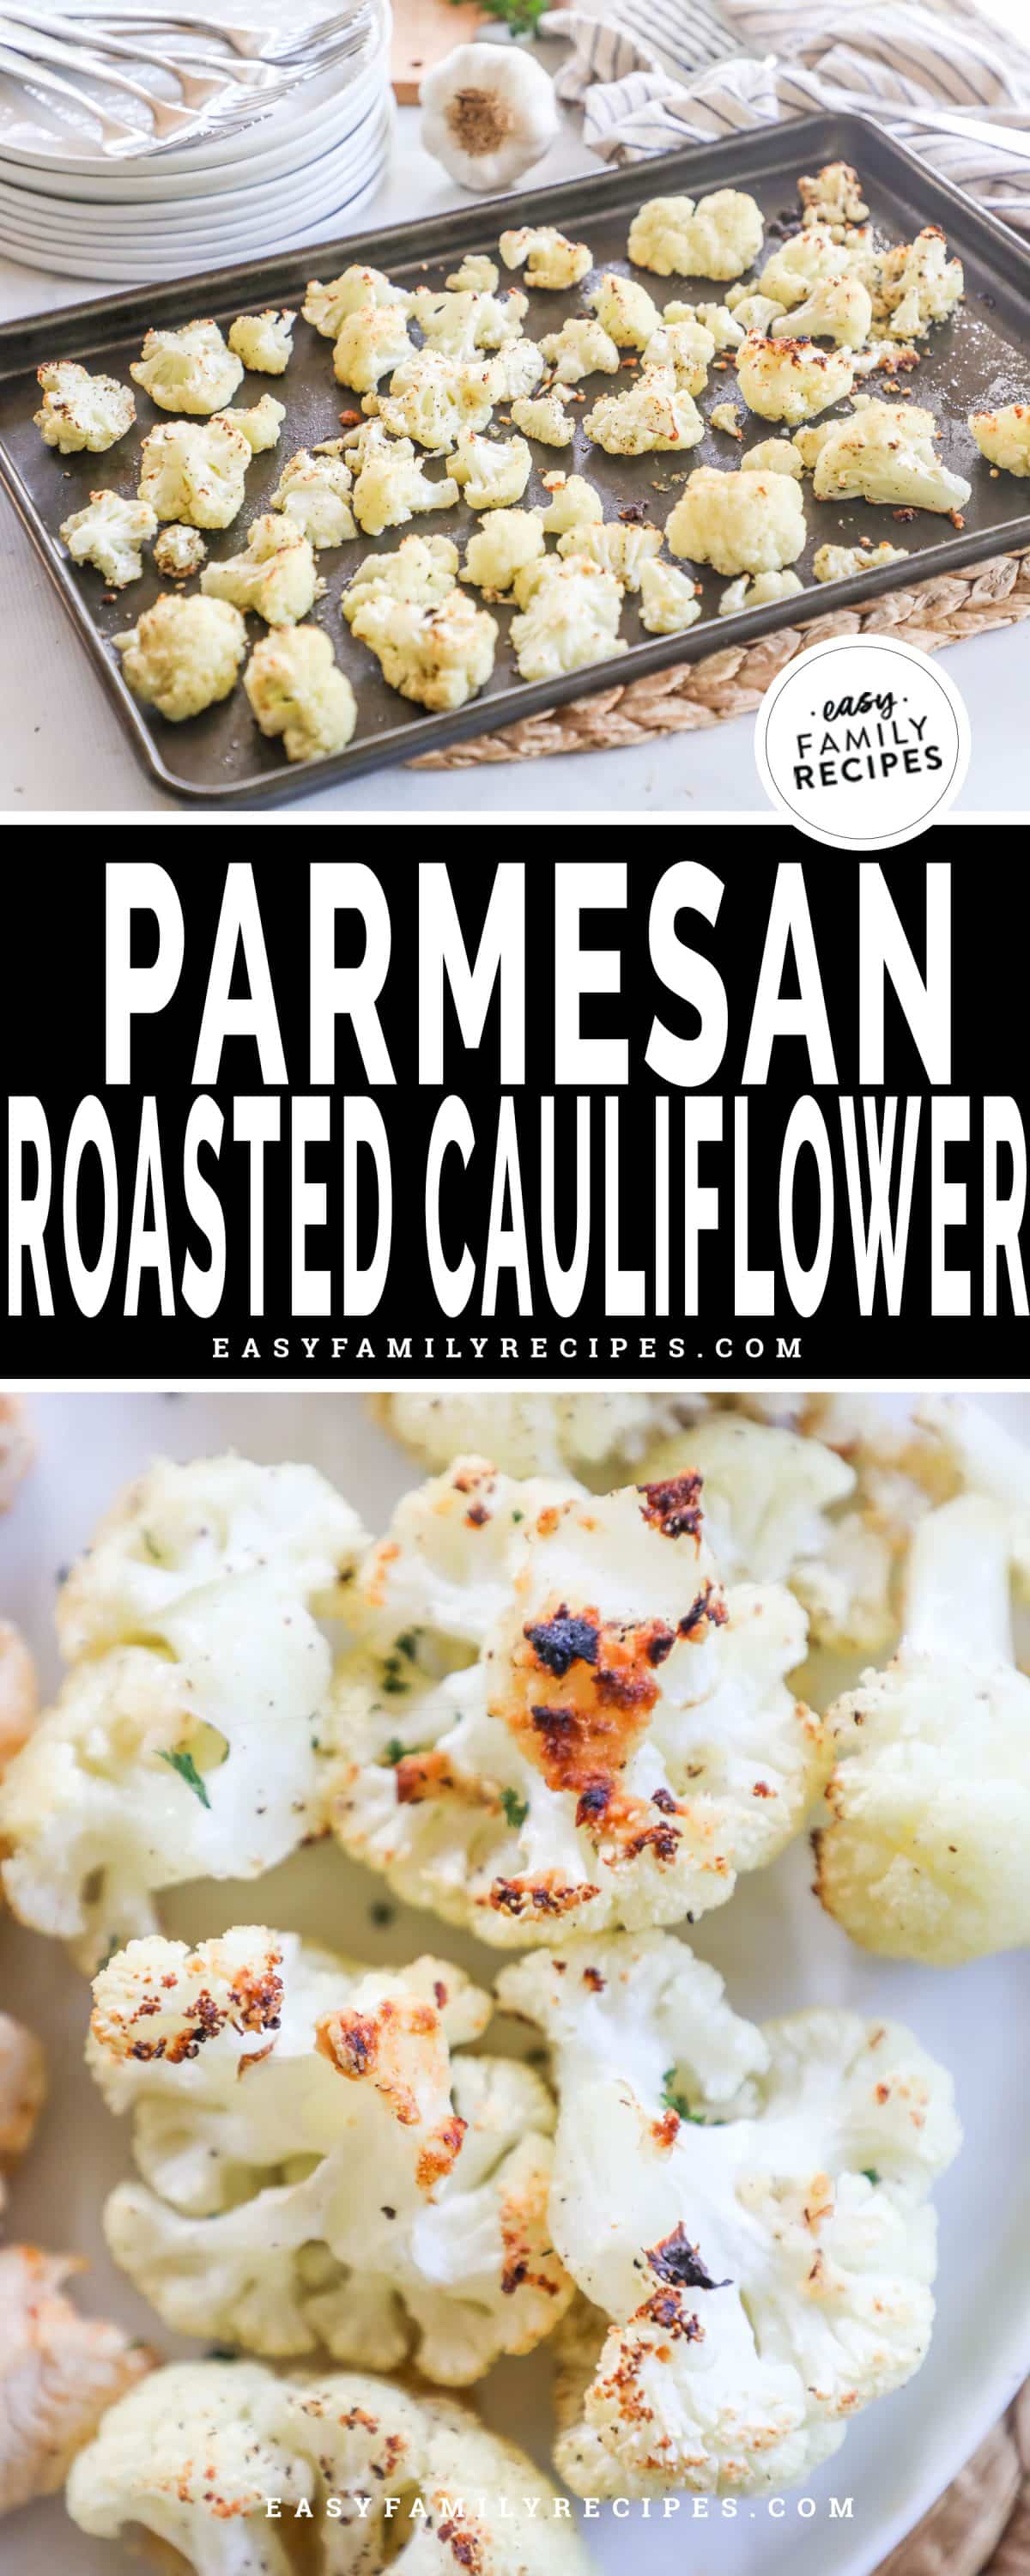 Roasted cauliflower on a sheet tray and on a plate.